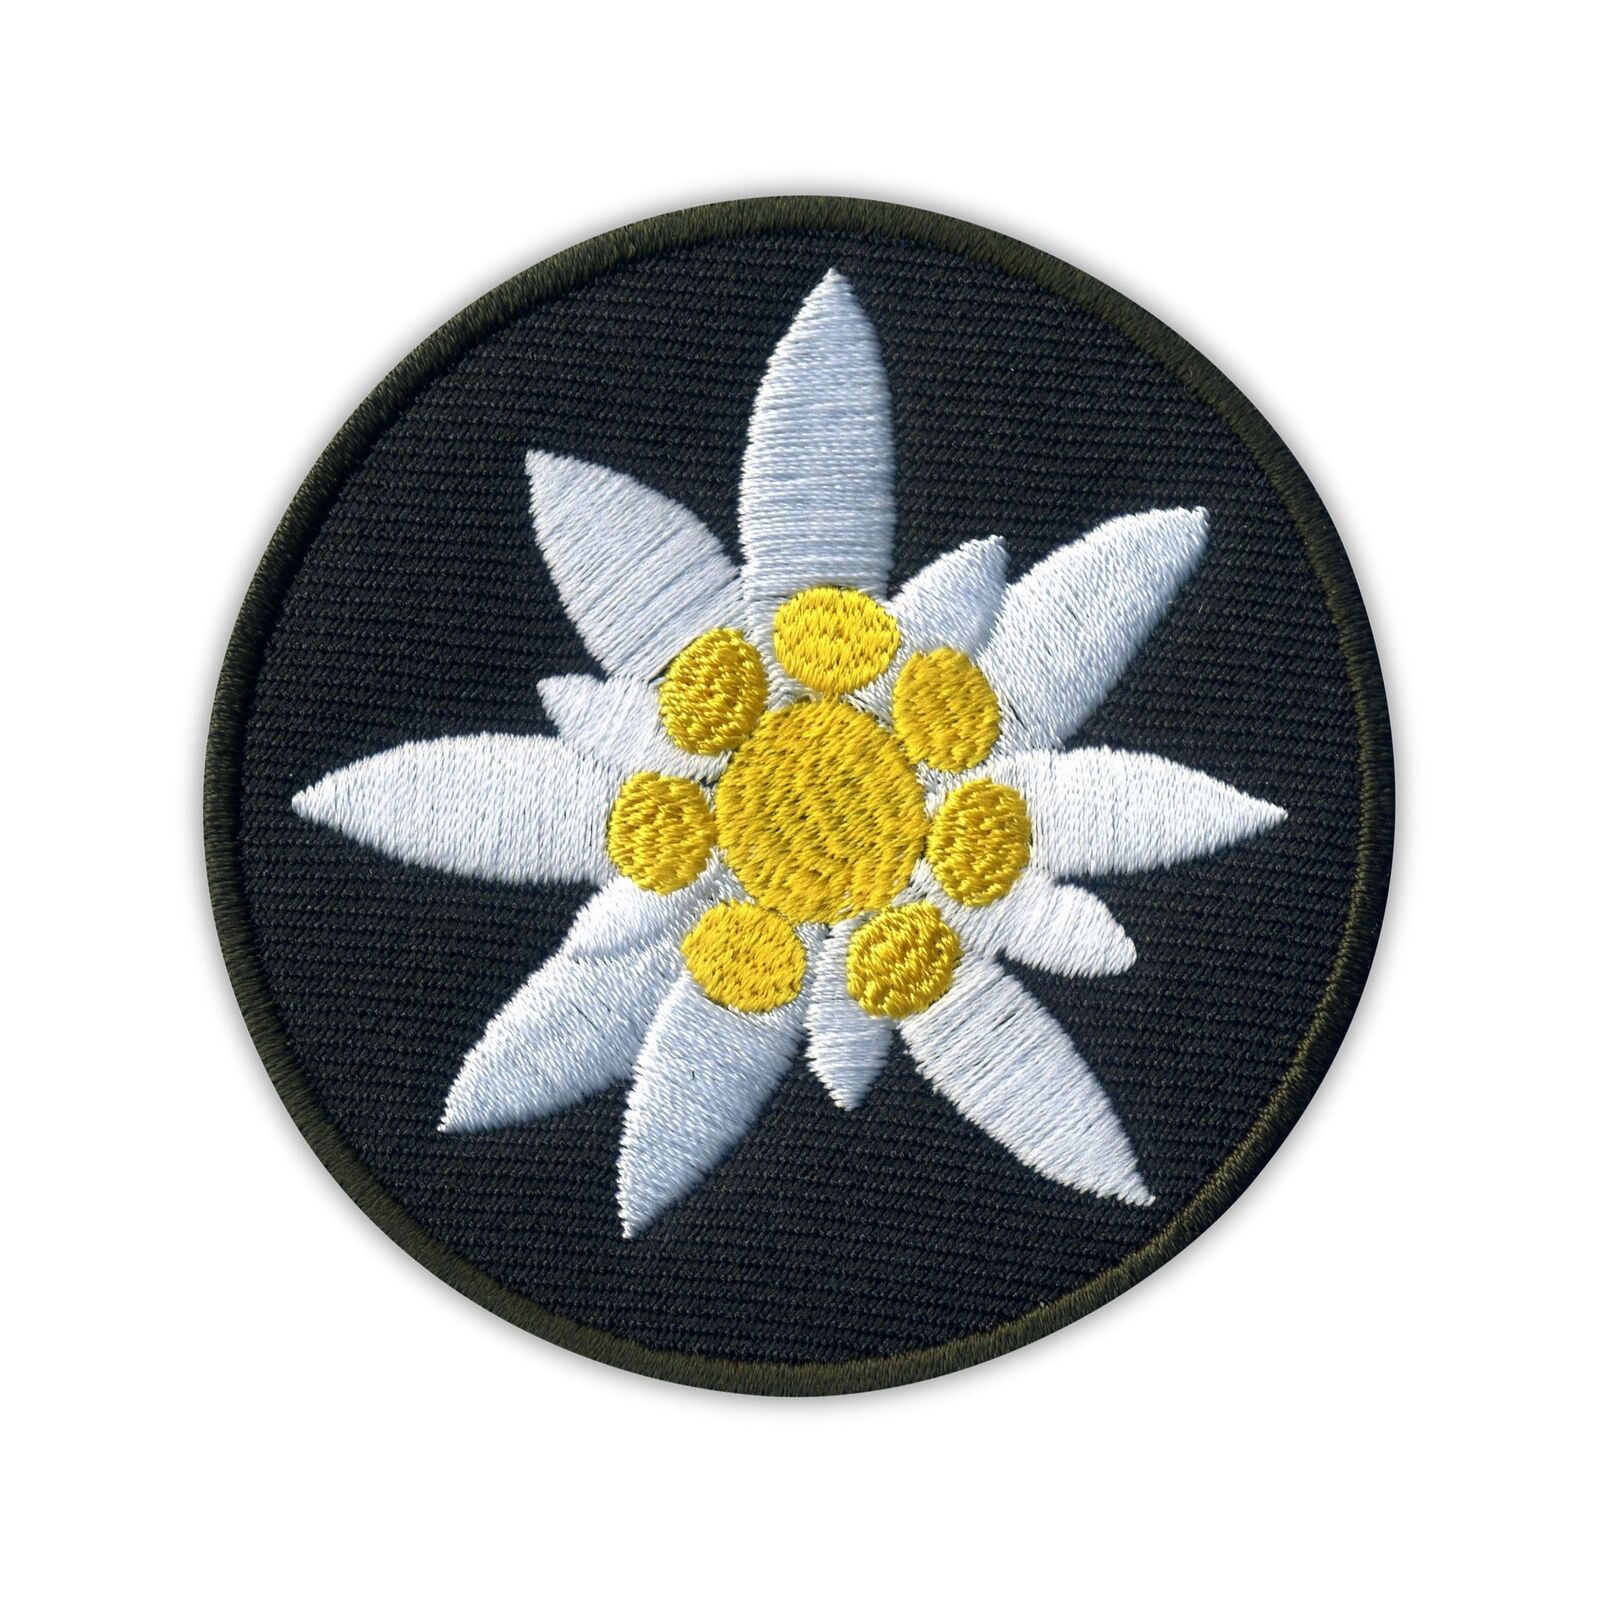 EDELWEISS - a mountain flower Patch/Badge Embroidered